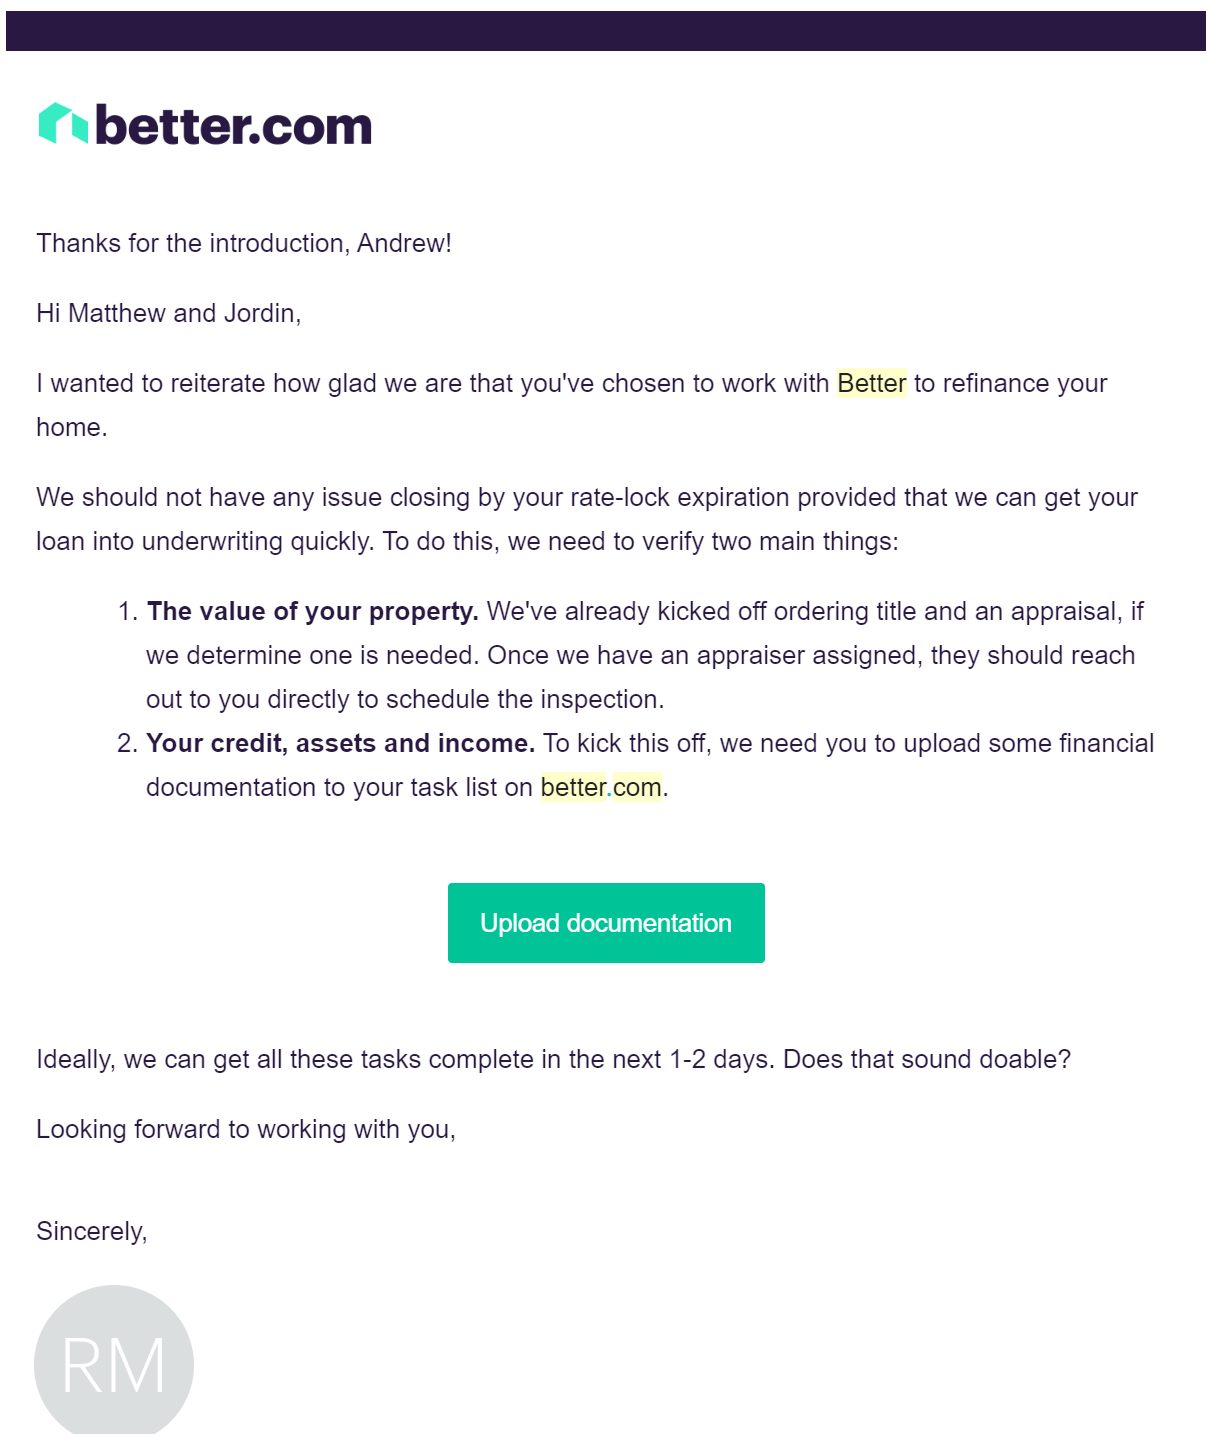 Intro canned response from Better.com